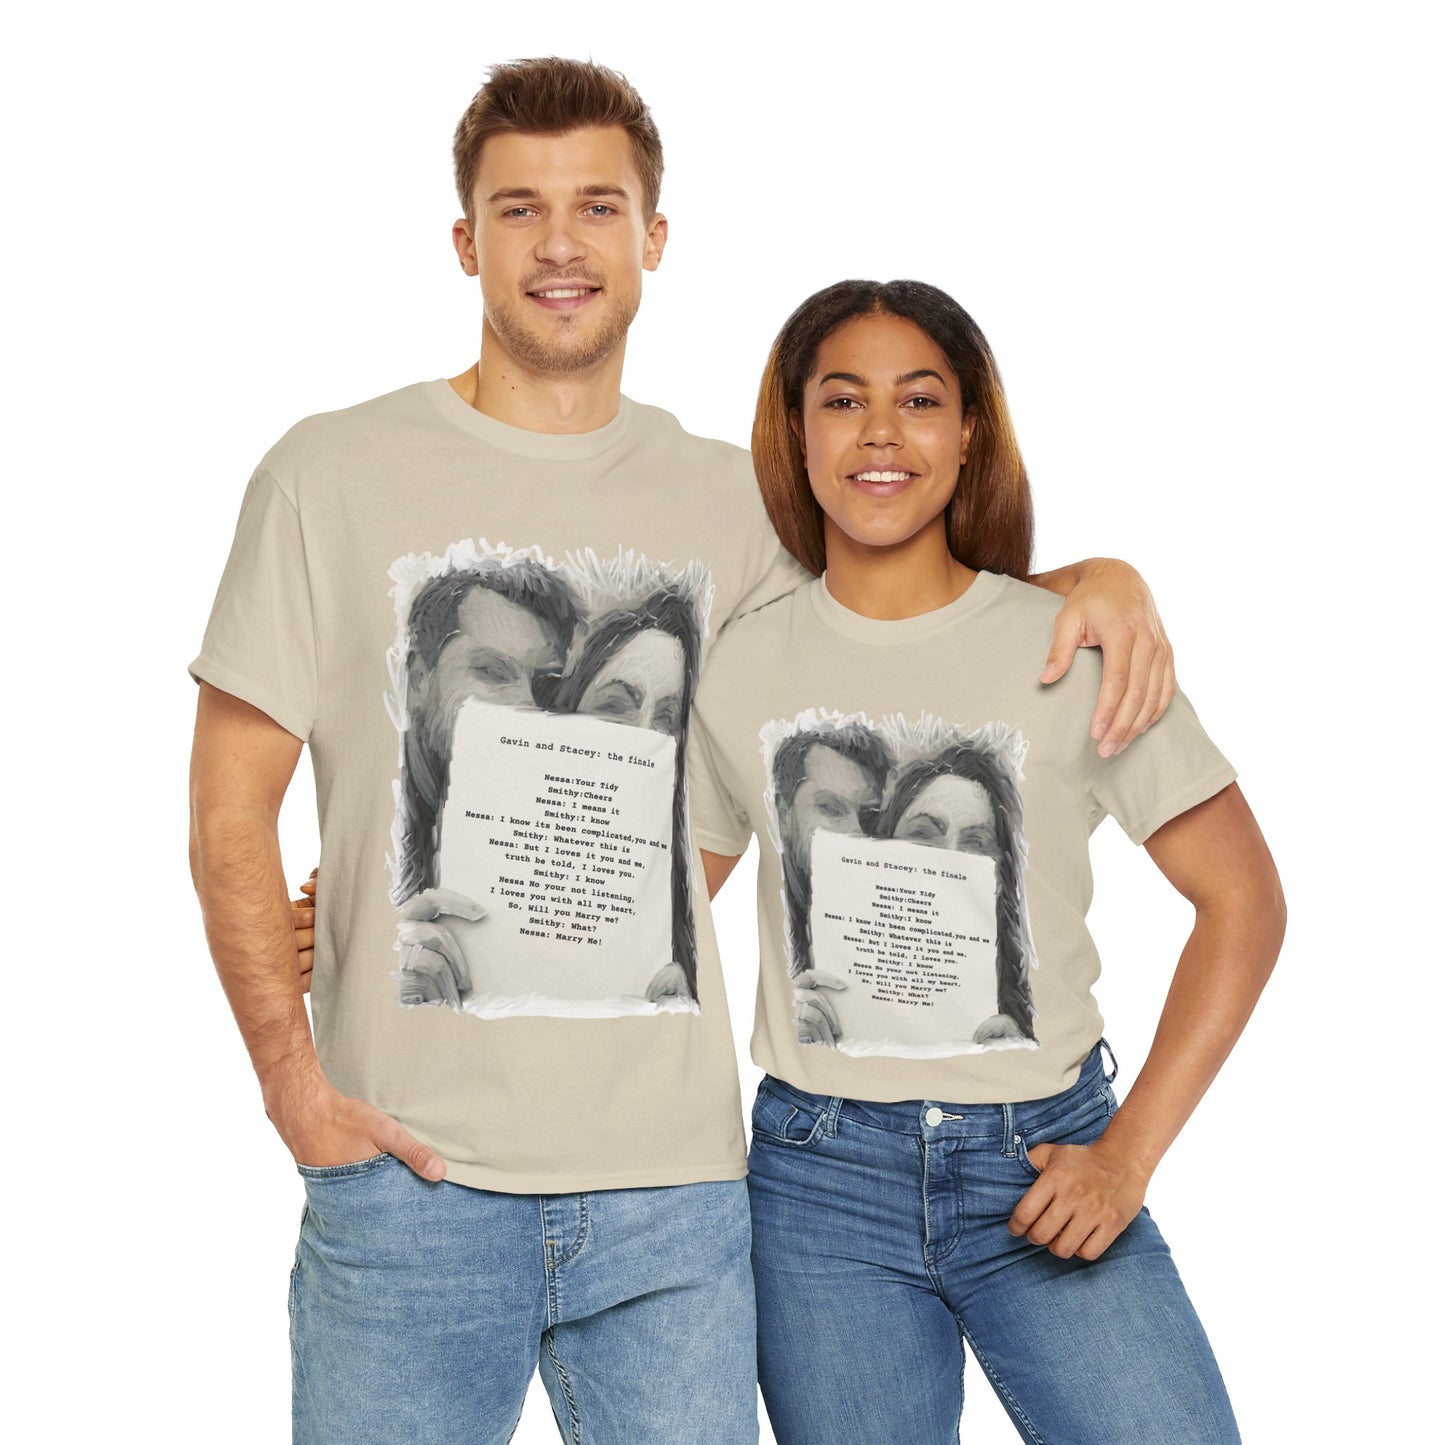 Will You Marry Me?" Gavin and Stacey Proposal T-shirt